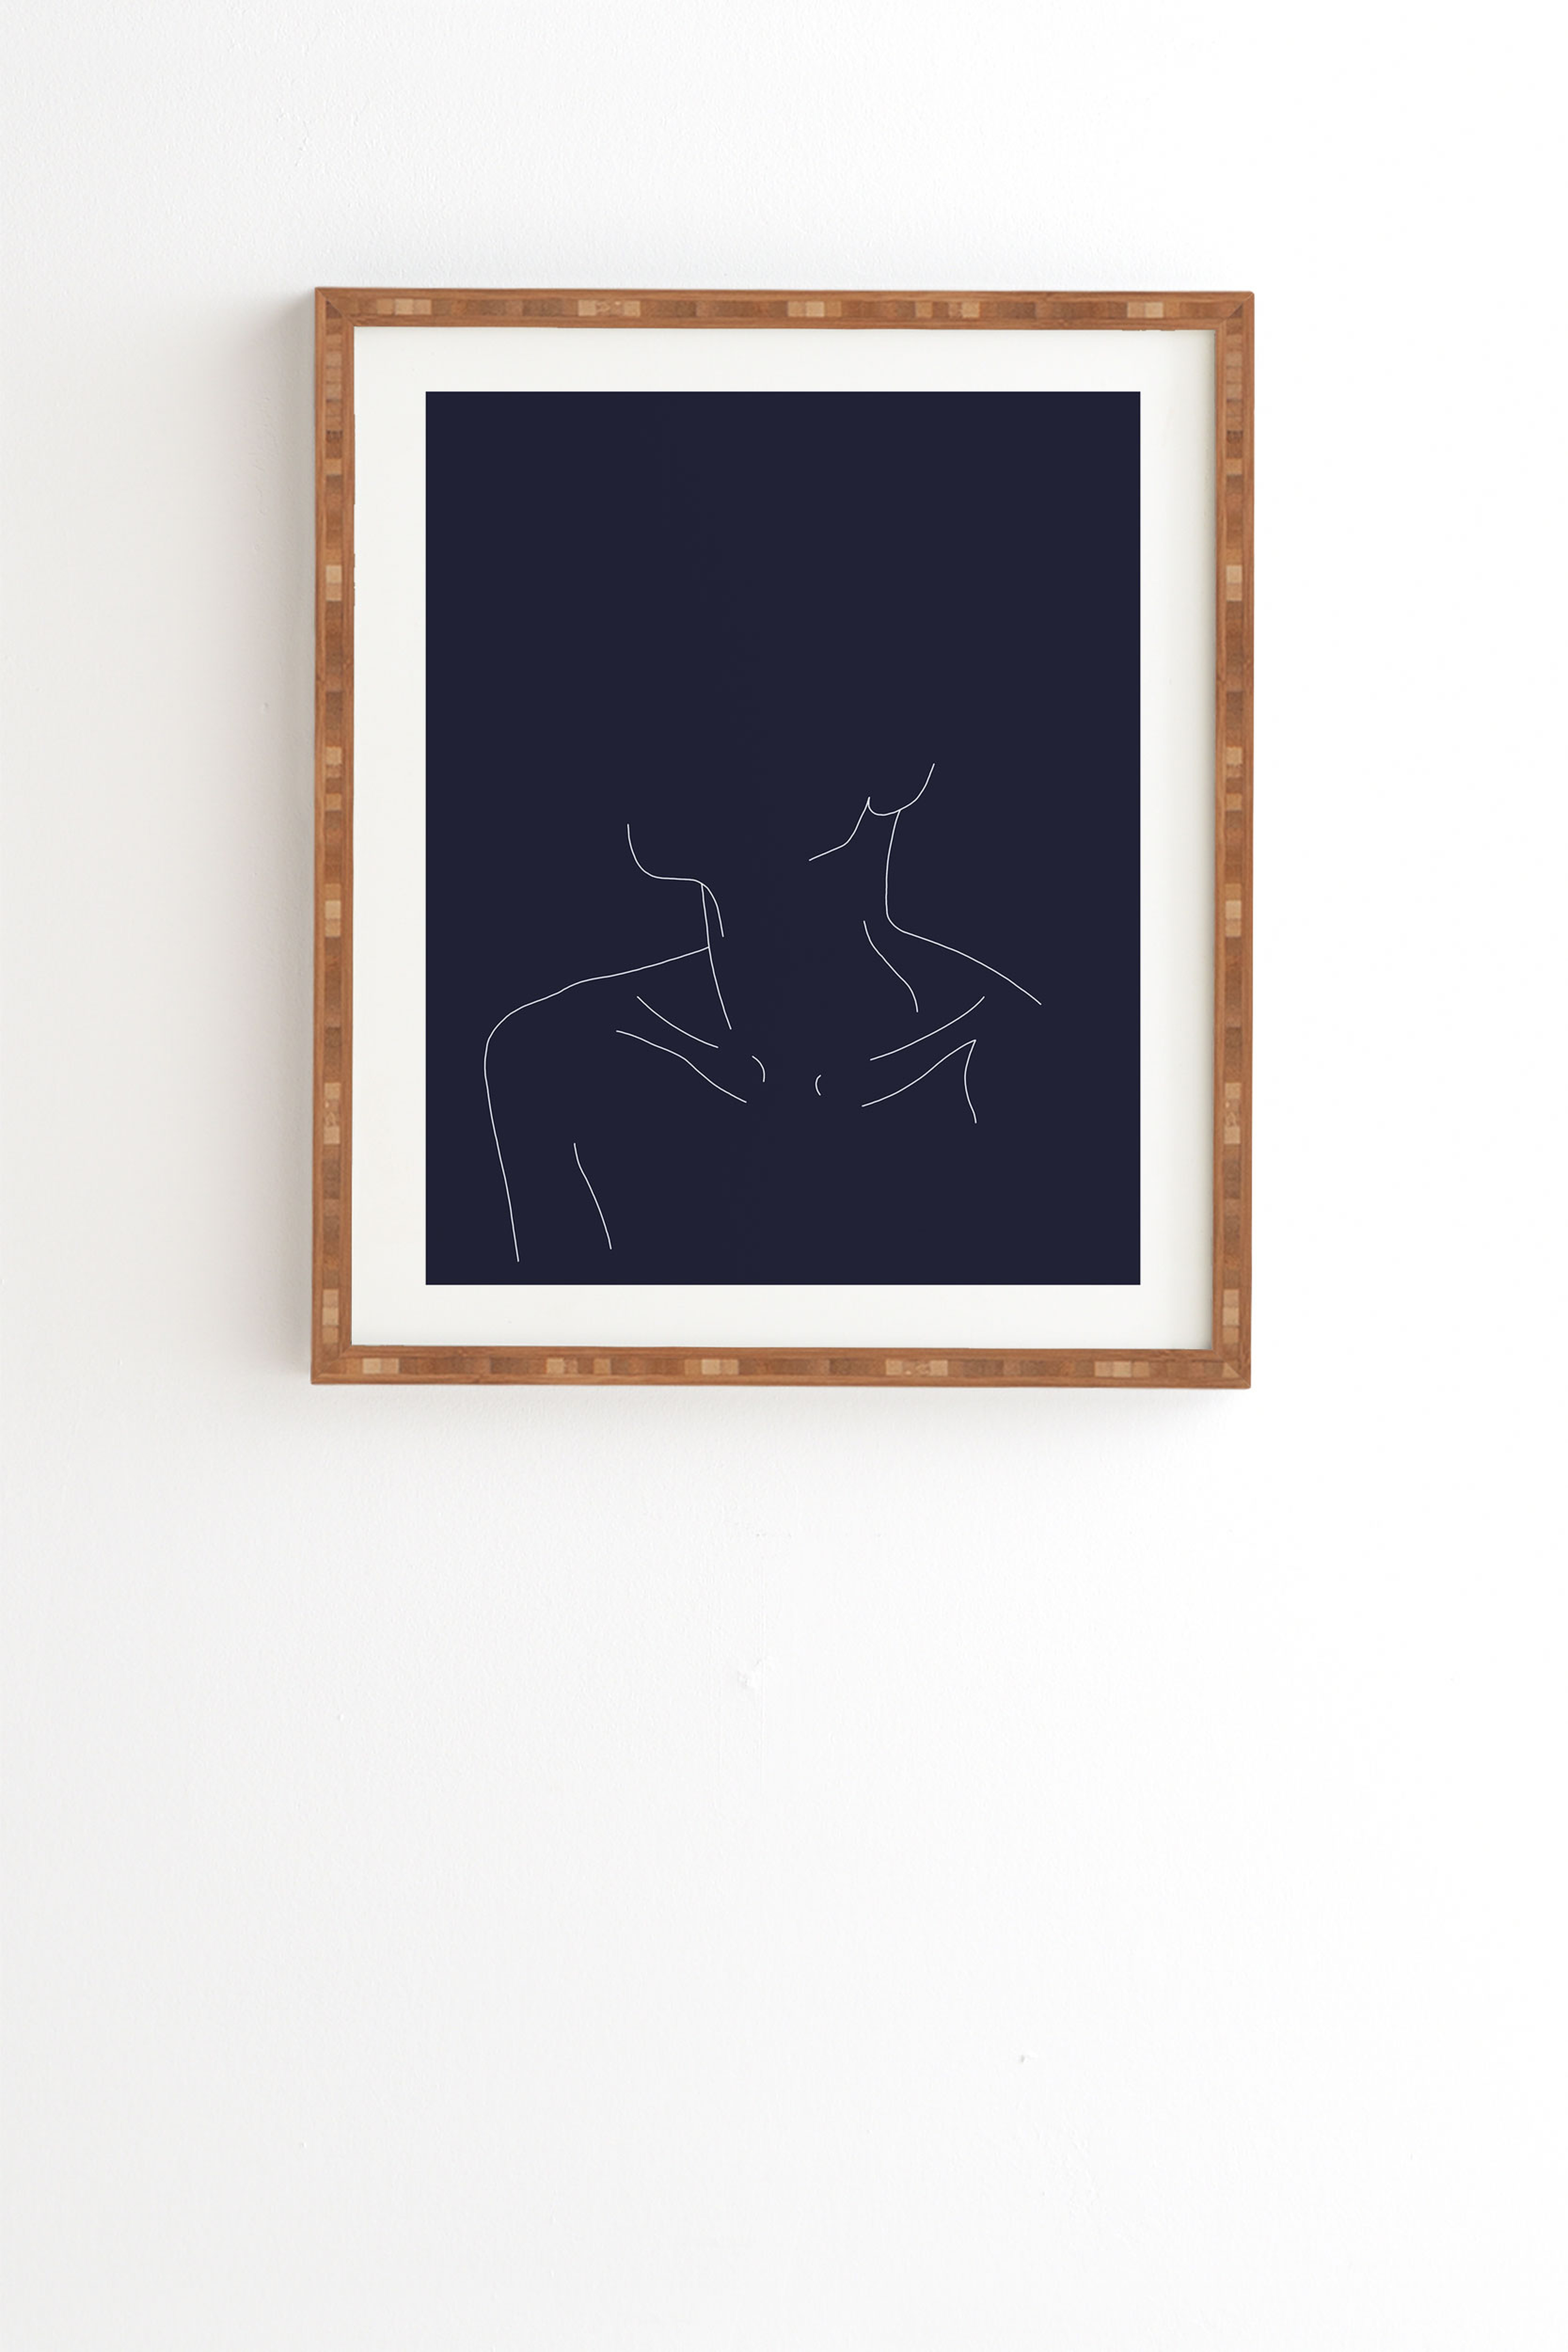 Female Illustration Ali Blue by The Colour Study - Framed Wall Art Bamboo 19" x 22.4" - Wander Print Co.